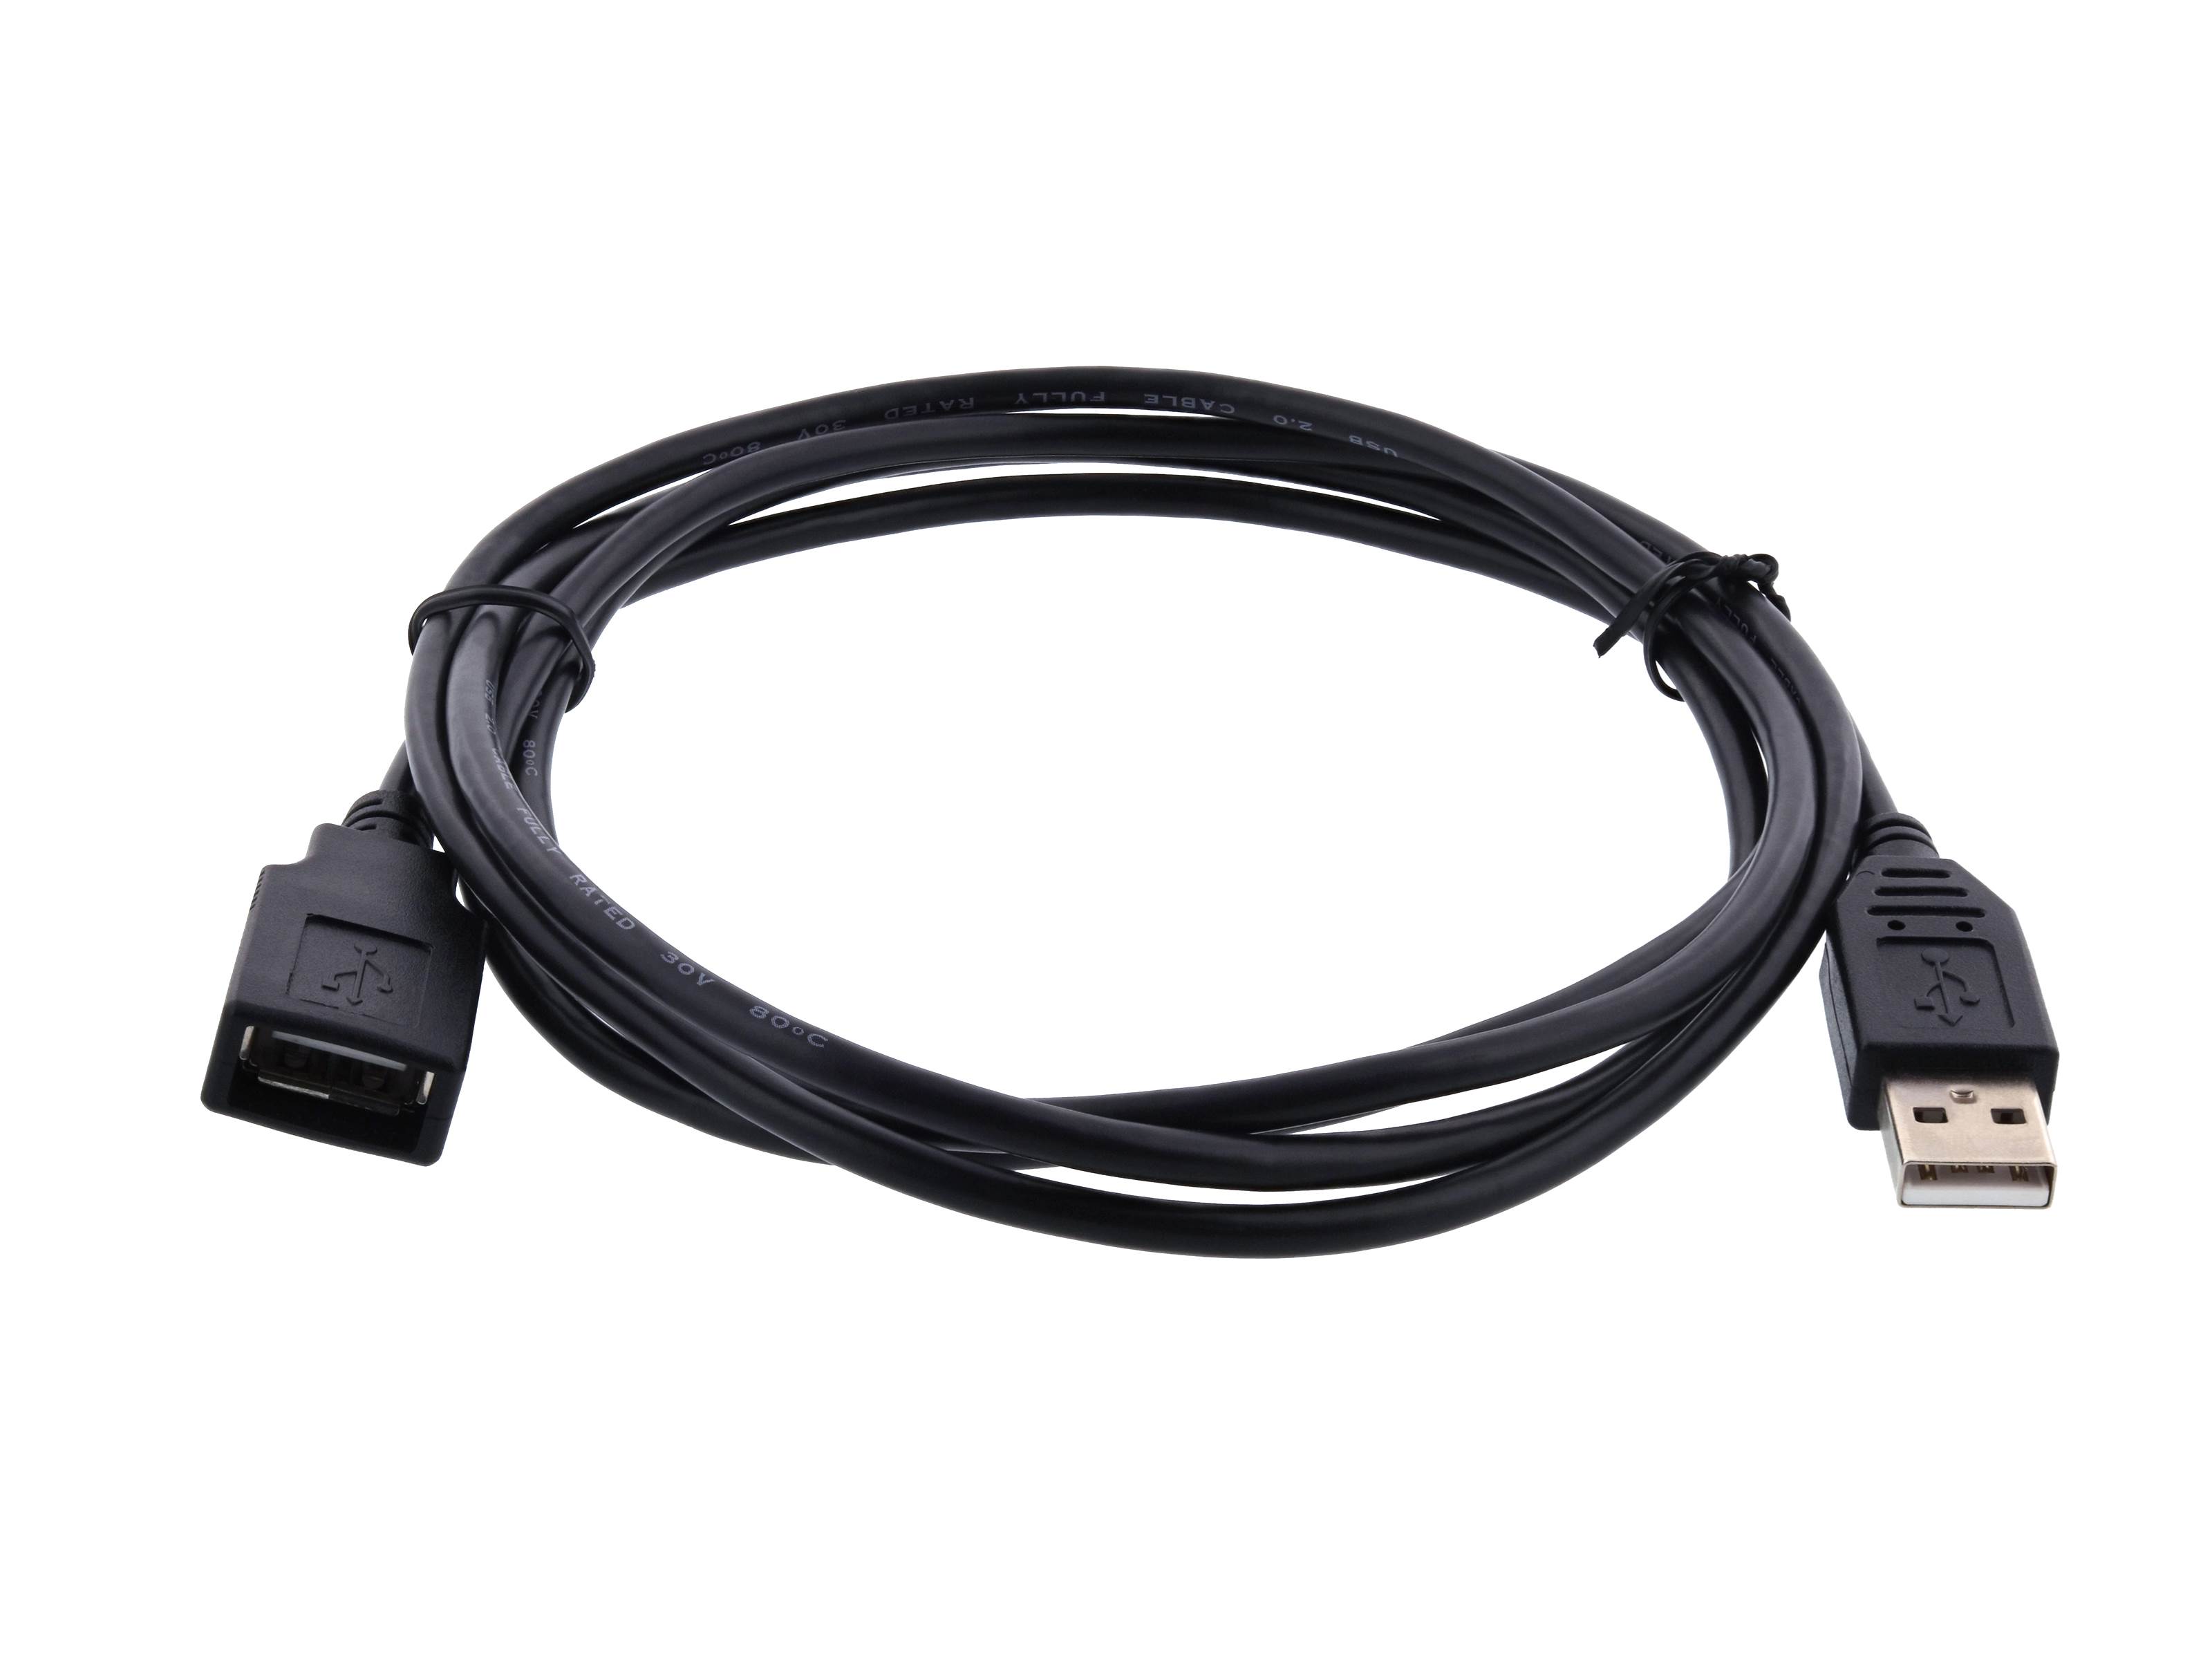 USB 2.0 Extension Cable A to A M/F - 6 FT For PC or Mac